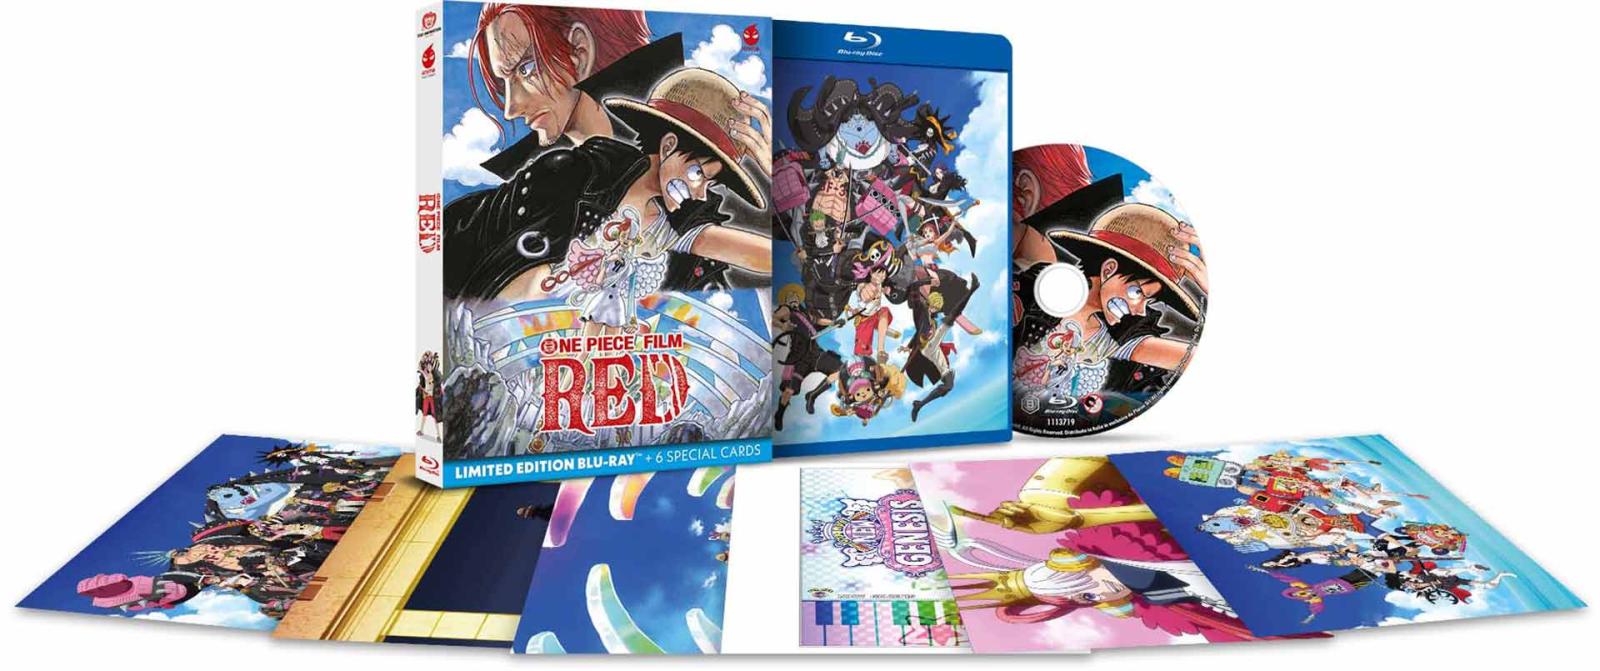 One Piece Film: RED - Limited Edition Blu-ray + 6 Special Cards (Blu-ray) Image 4